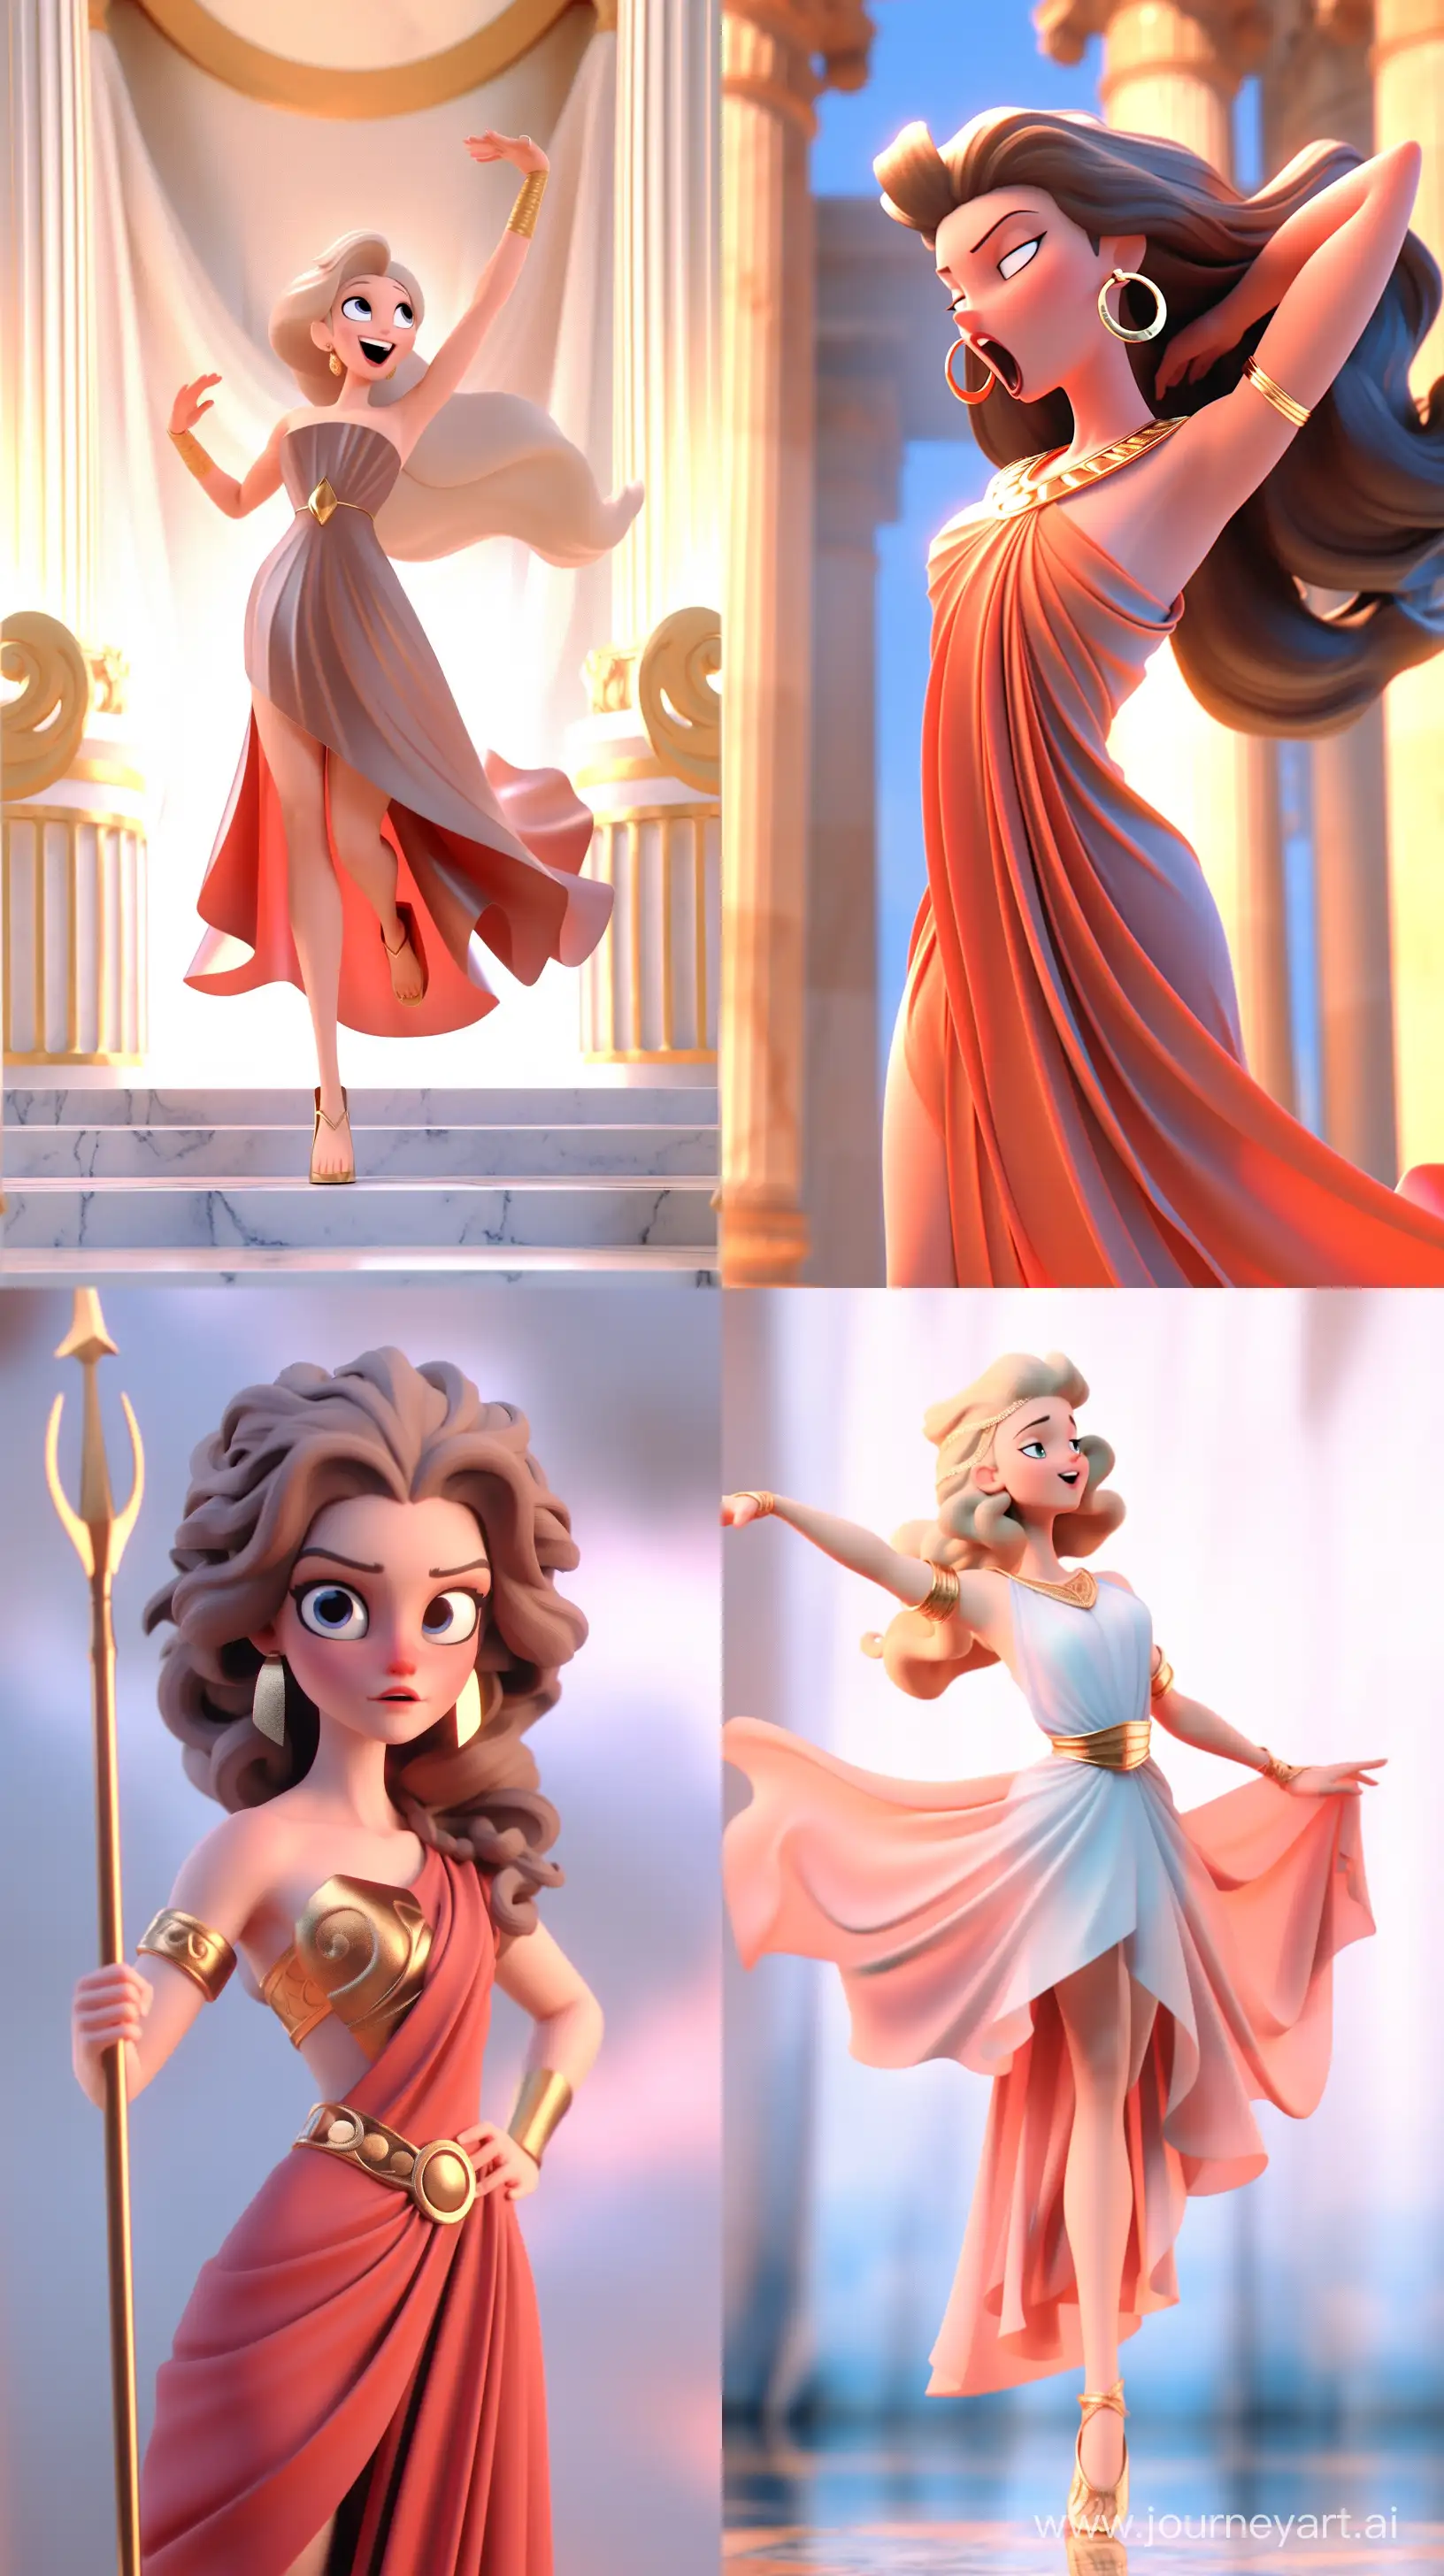 Celestial-Greek-Goddess-Engages-in-Exercise-3D-Animation-in-Pixar-Style